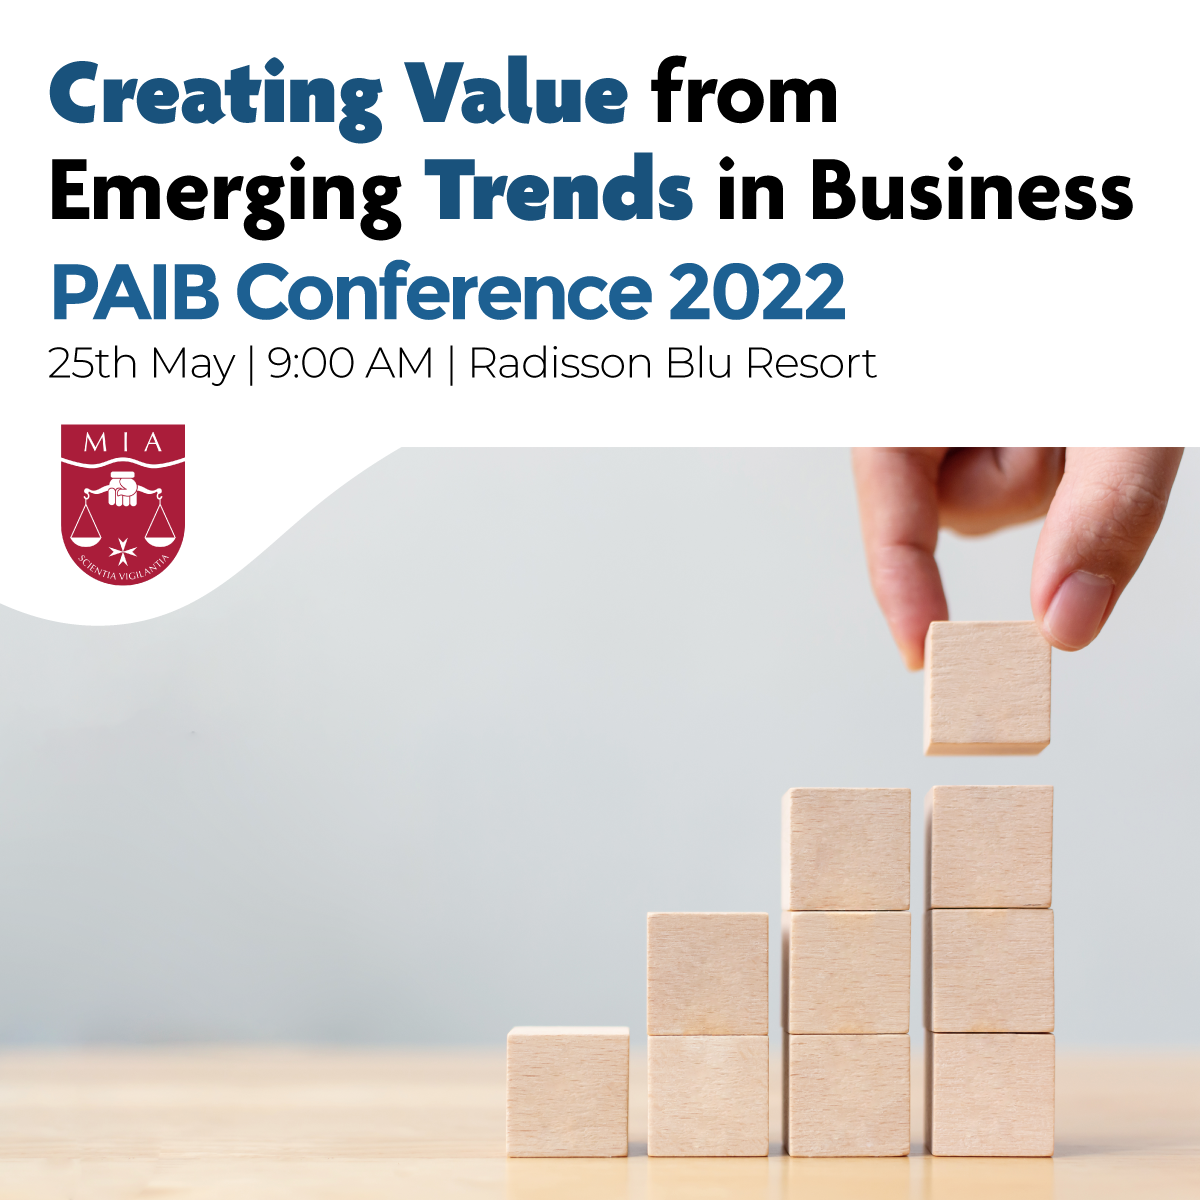 Creating Value from Emerging Trends in Business